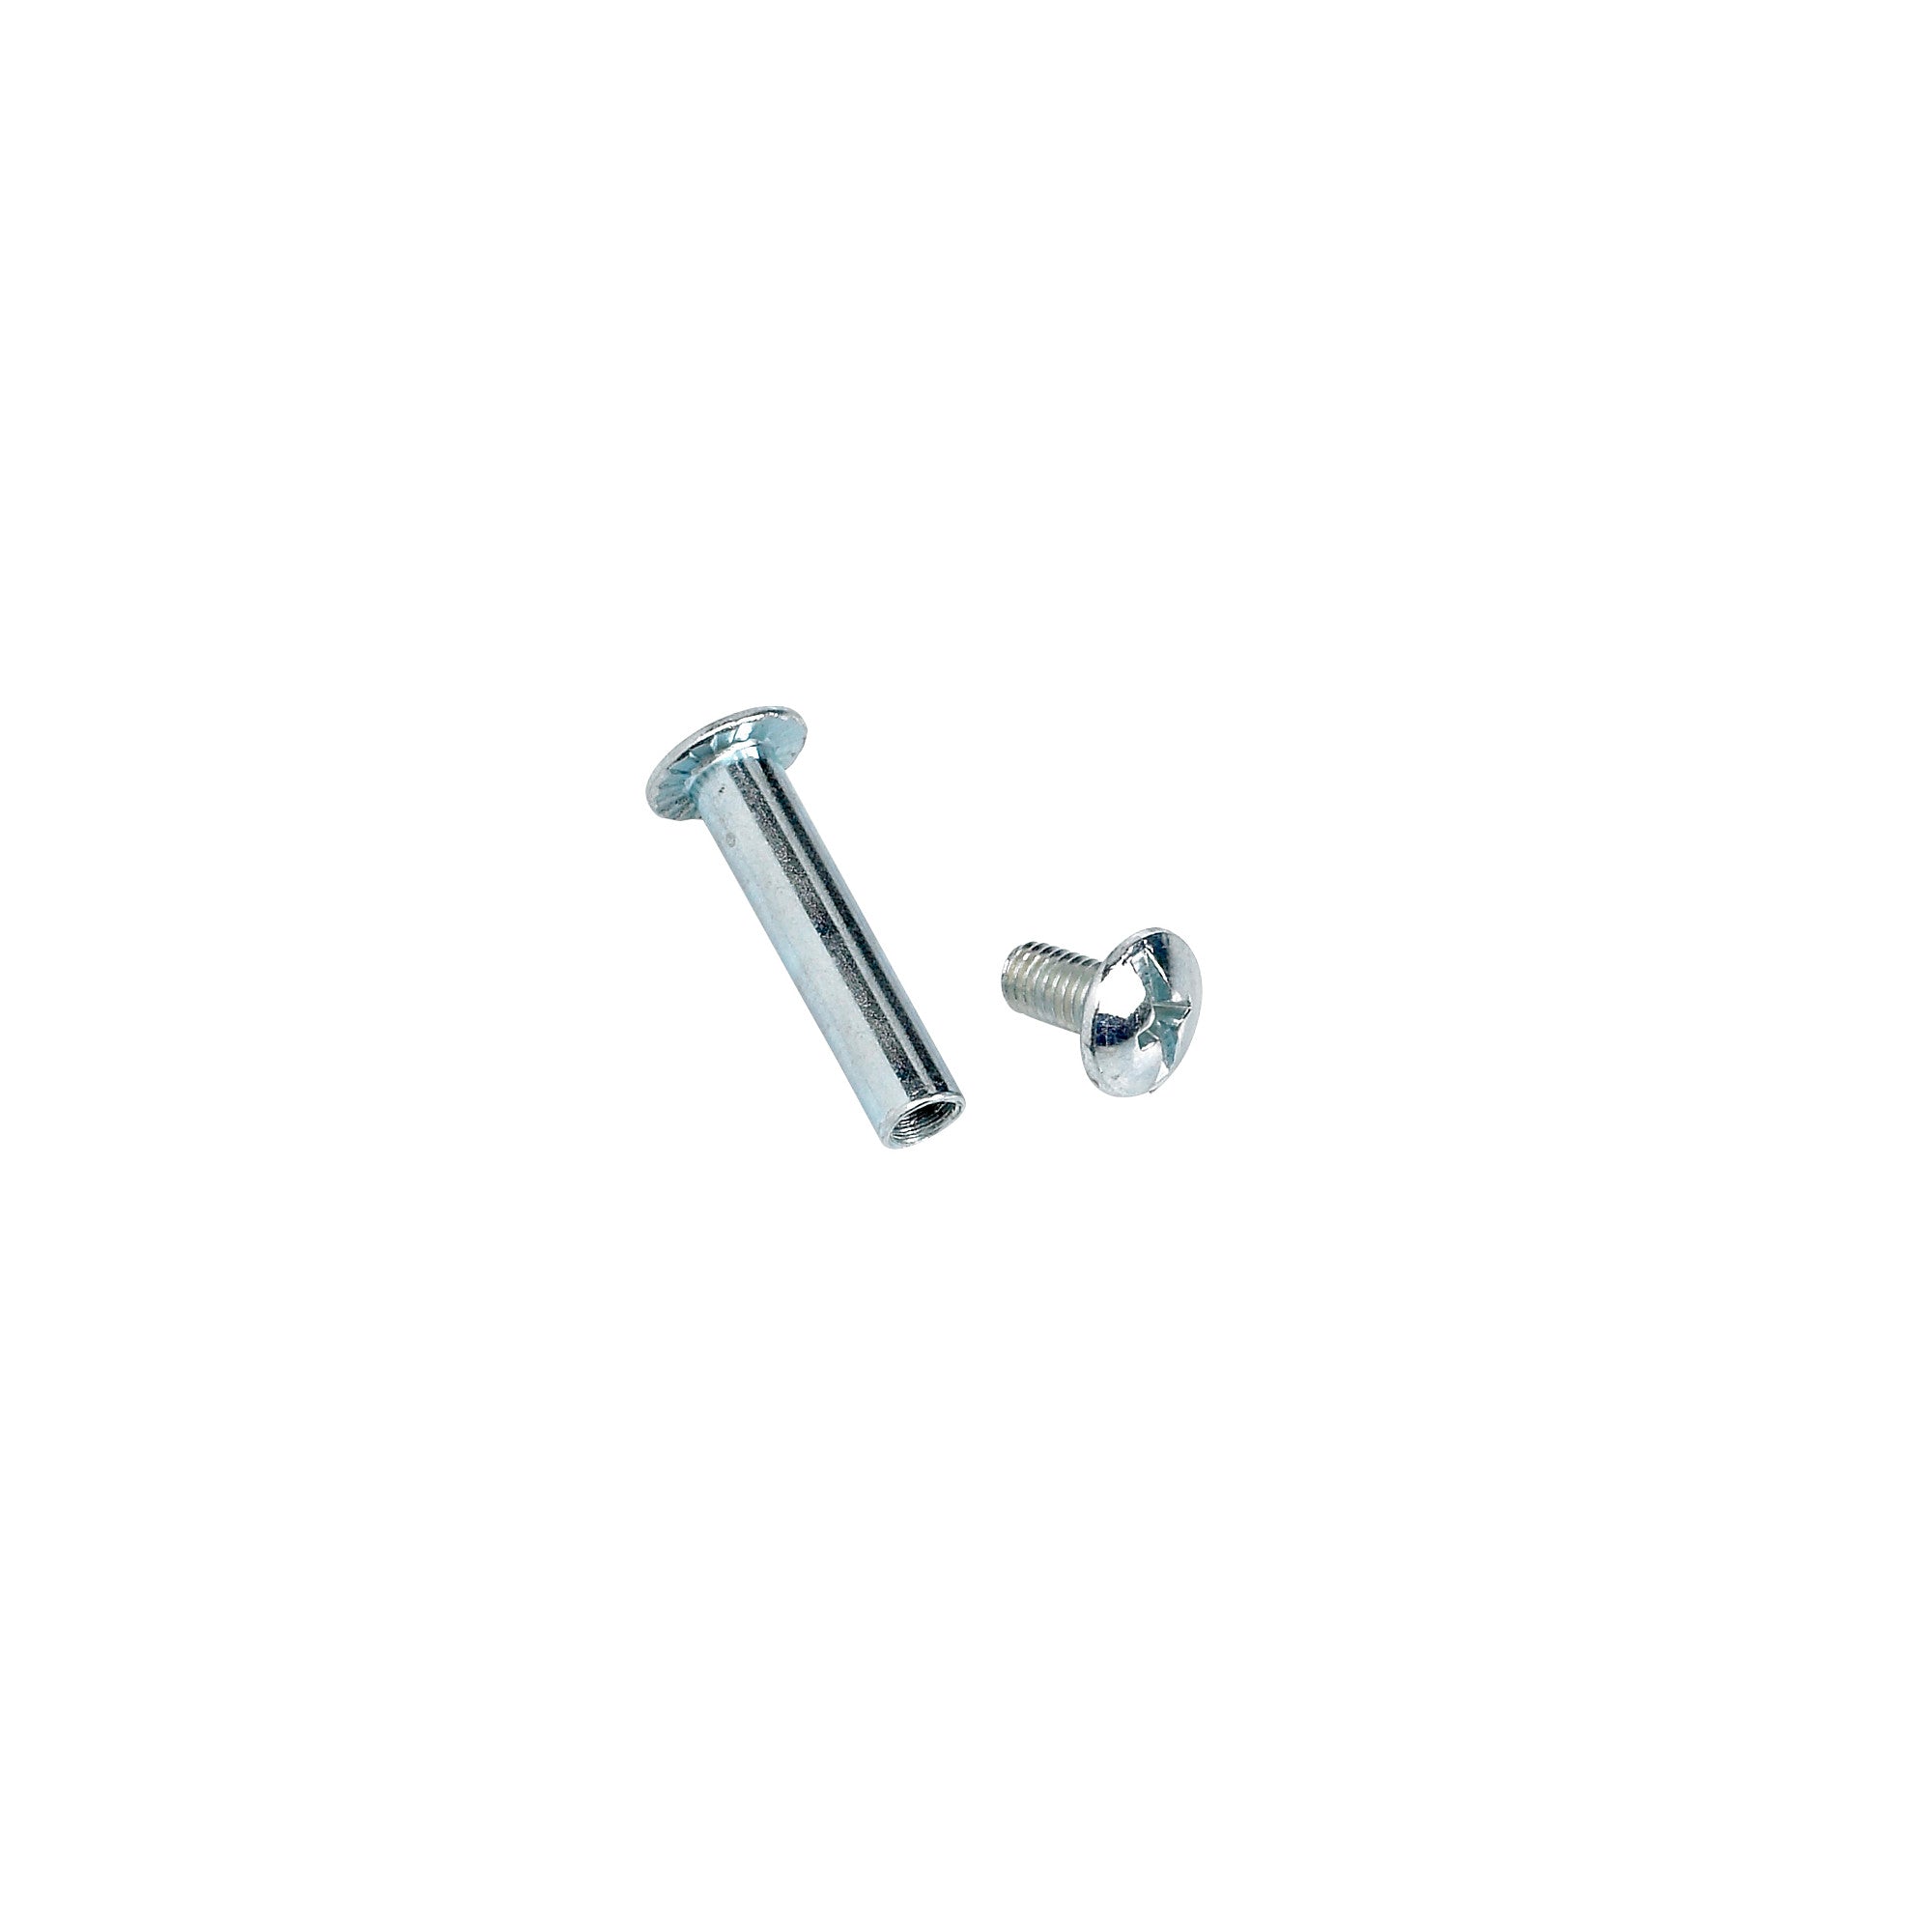 Replacement Handle Bolt and Nut for Bypass Loppers